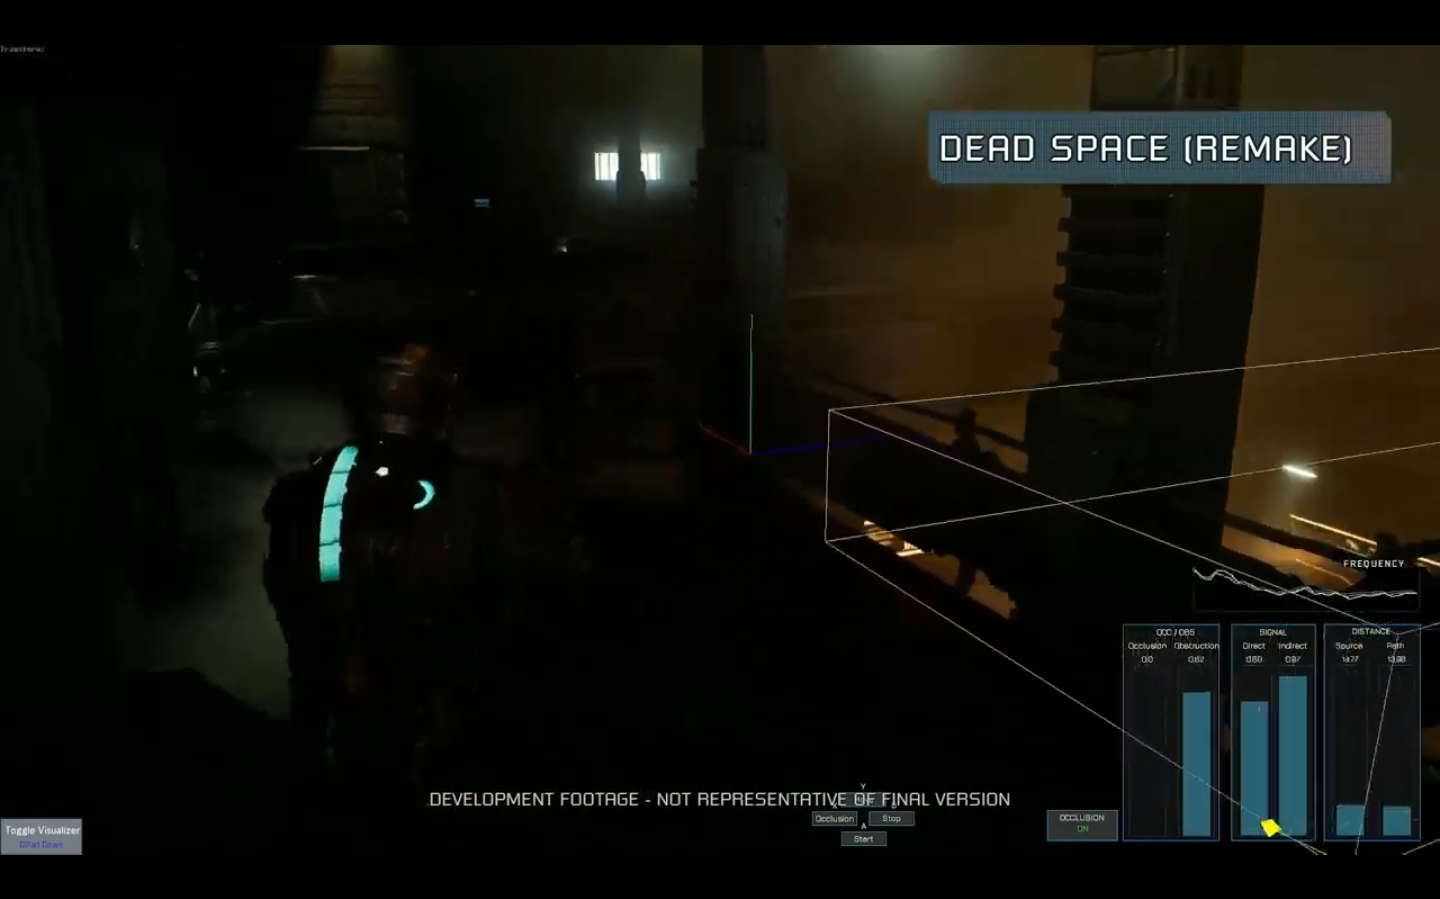 Dead Space Remake: the reinvention of the sound of terror explained by its developers